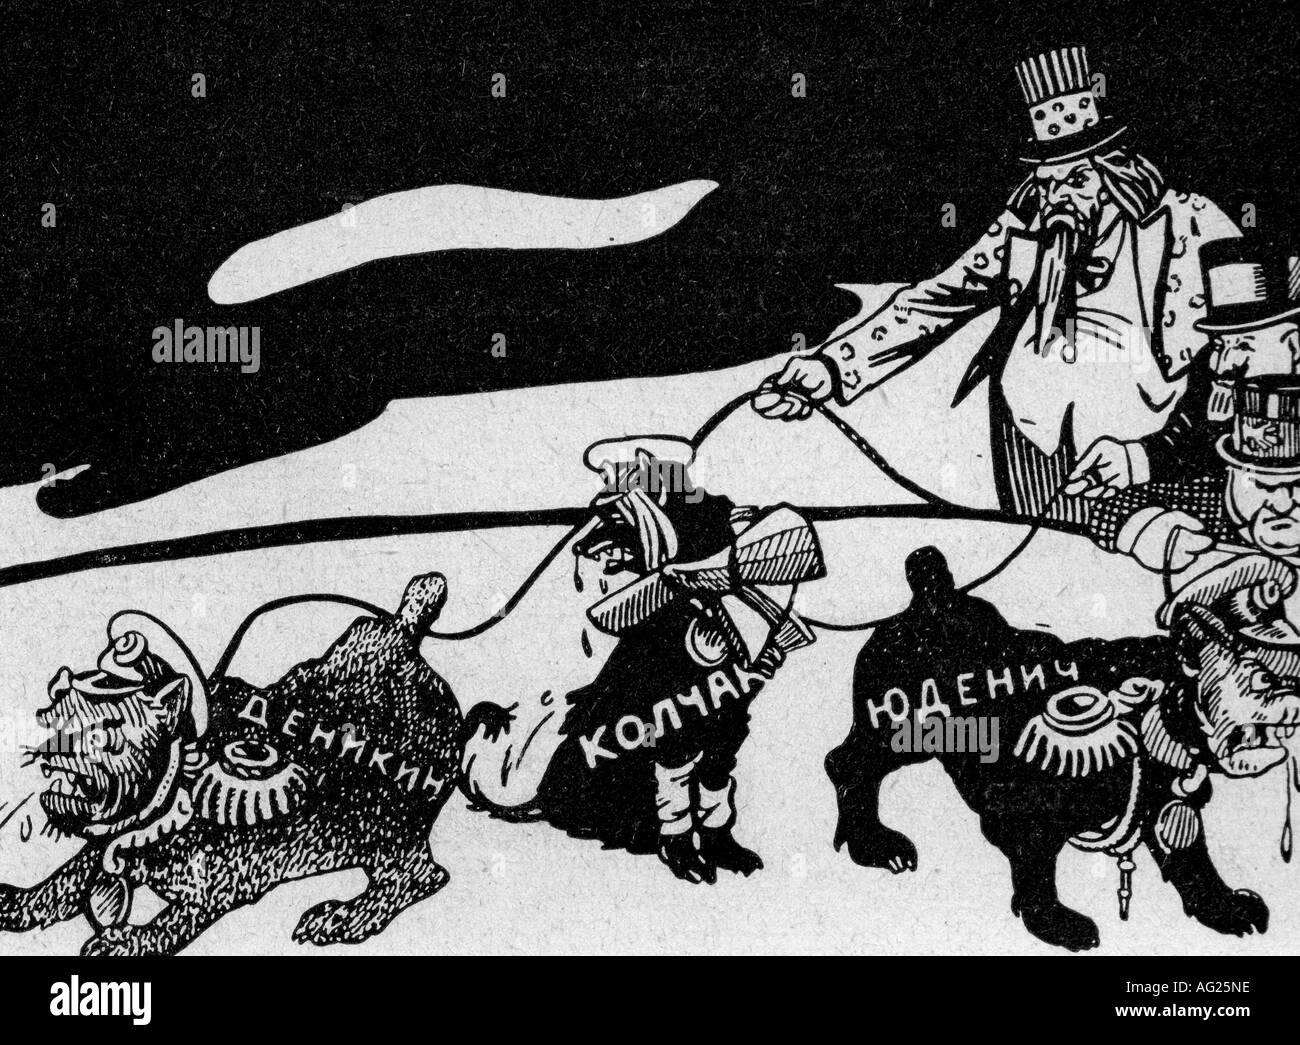 geography/travel, Russia, Civil War 1918 - 1922, intervention of the Western Allies, white generals as bloodhounds of the west, caricature by Deni, 1919, General Anton Denikin, Admiral Aleksandr Kolshak, General Nikolai Yudenich, Uncle Sam, John Bull, USA, Great Briain, France, dogs, politics, white movement, historic, historical, male, man, men, people, 20th century, 1910s, Stock Photo